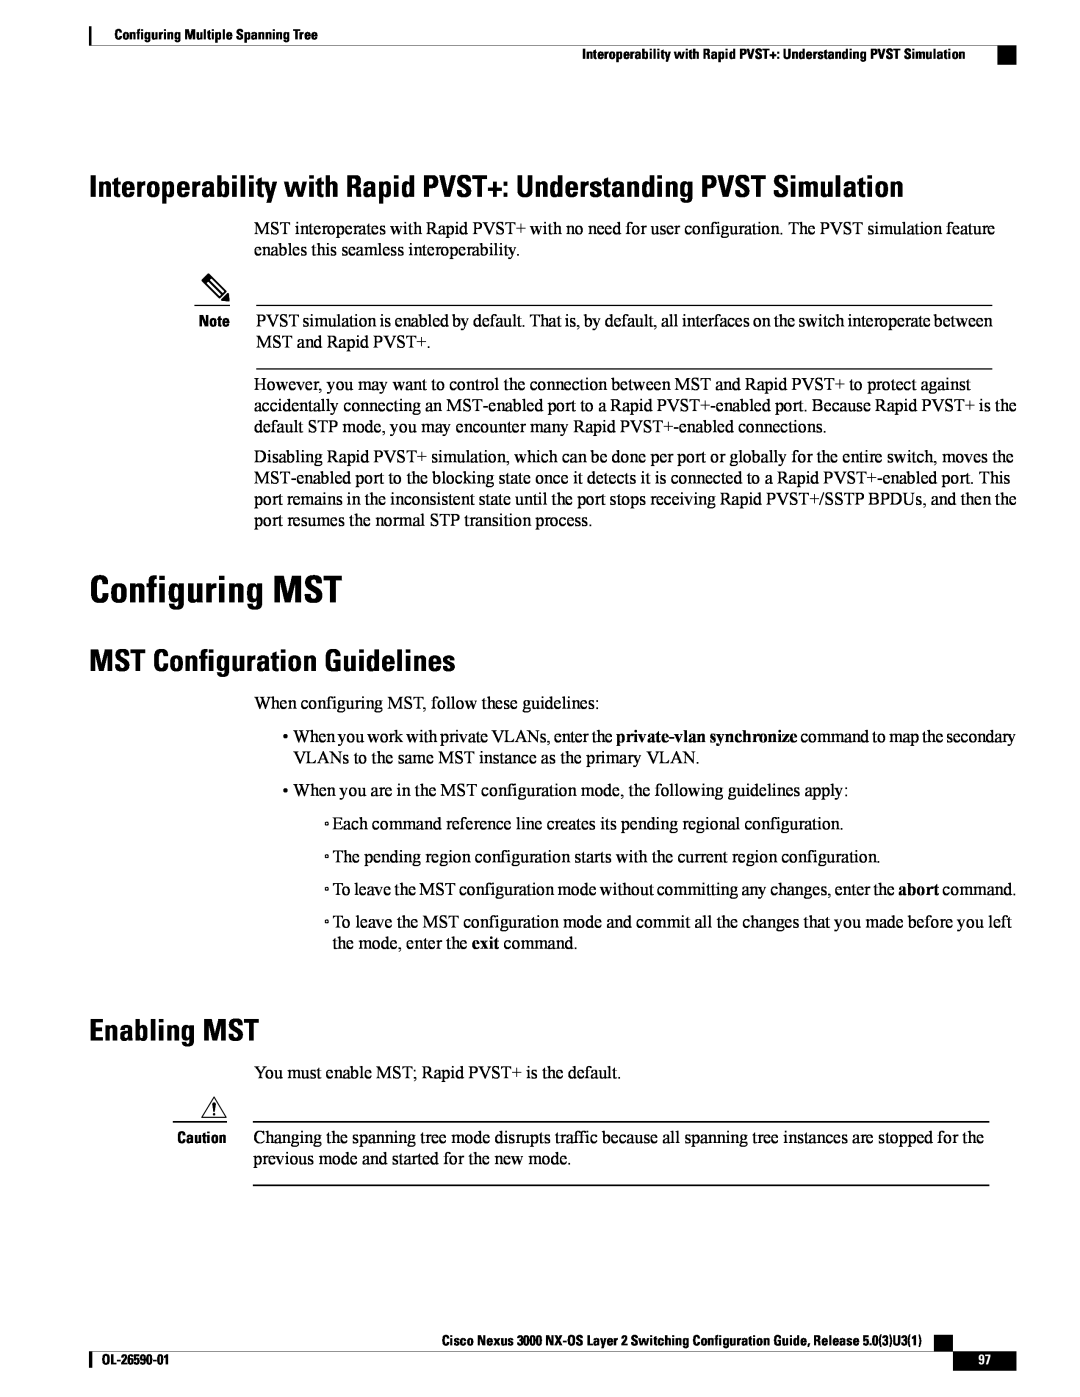 Cisco Systems N3KC3064TFAL3 Configuring MST, Interoperability with Rapid PVST+ Understanding PVST Simulation, Enabling MST 